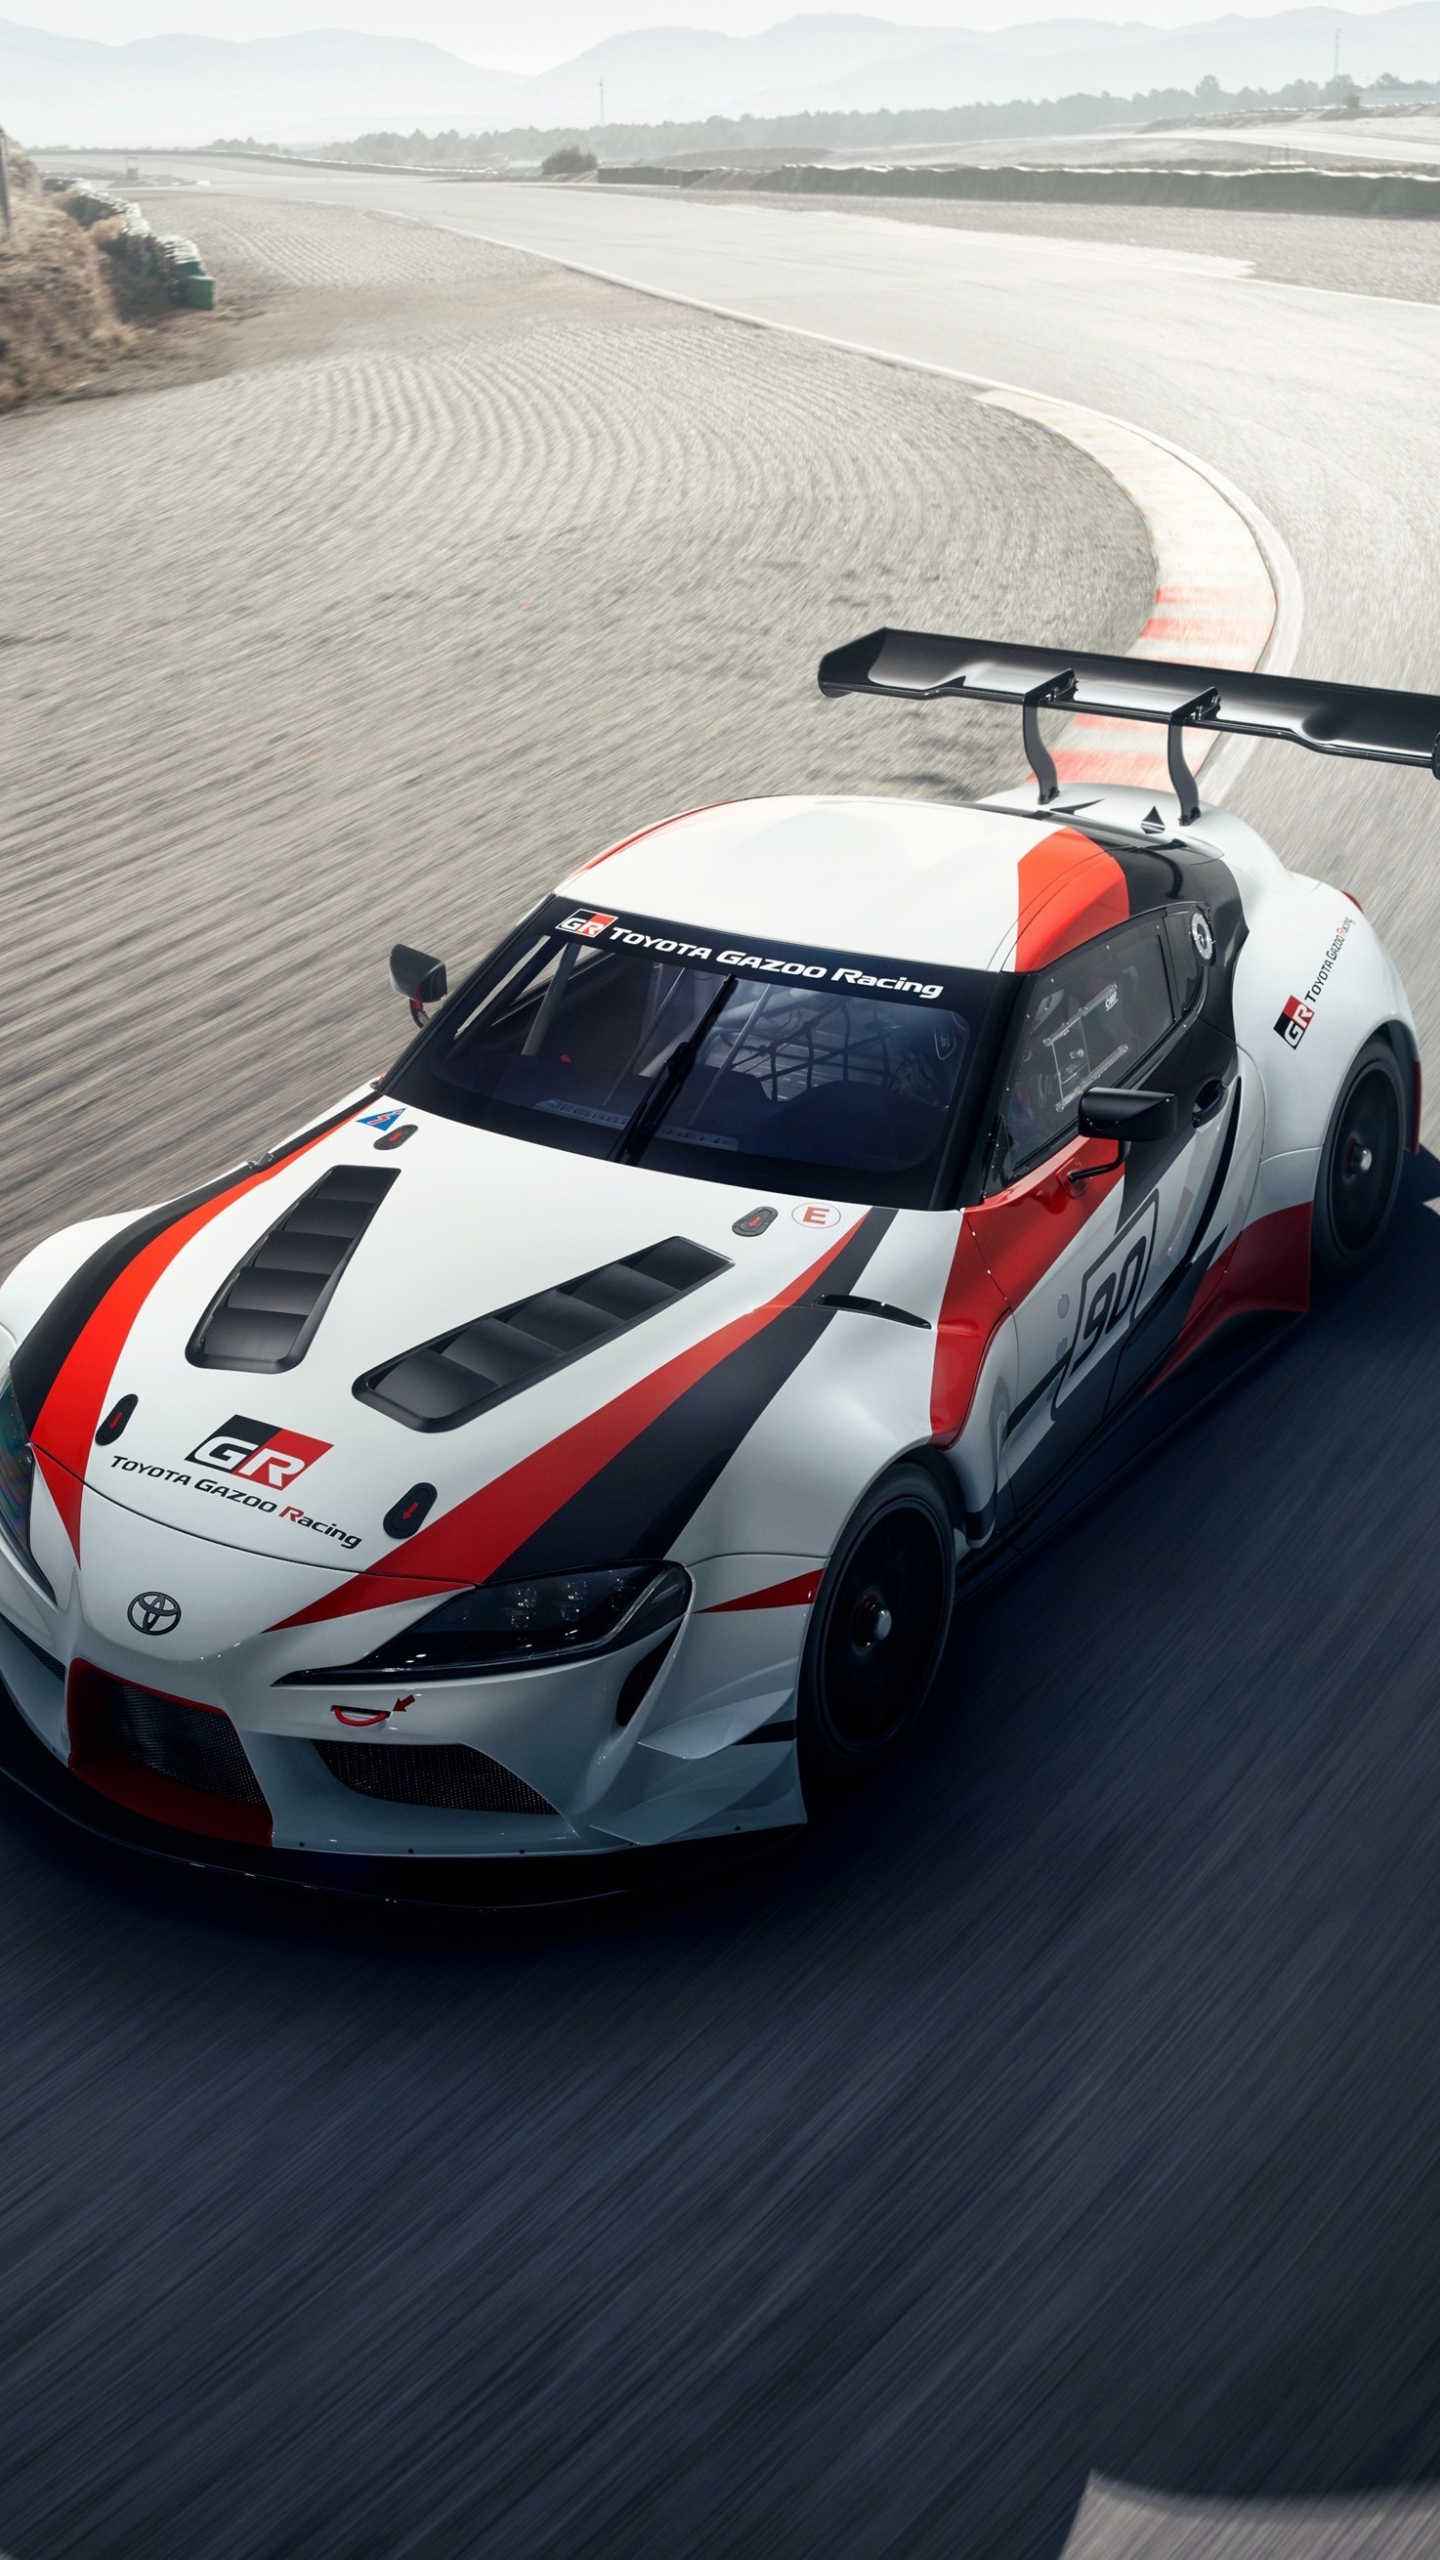 Download Toyota Gr Supra Racing Concept On Track 1440x2560 Wallpaper Qhd Samsung Galaxy S6 S7 Edge Note Lg G4 1440x2560 Hd Image Background 4256